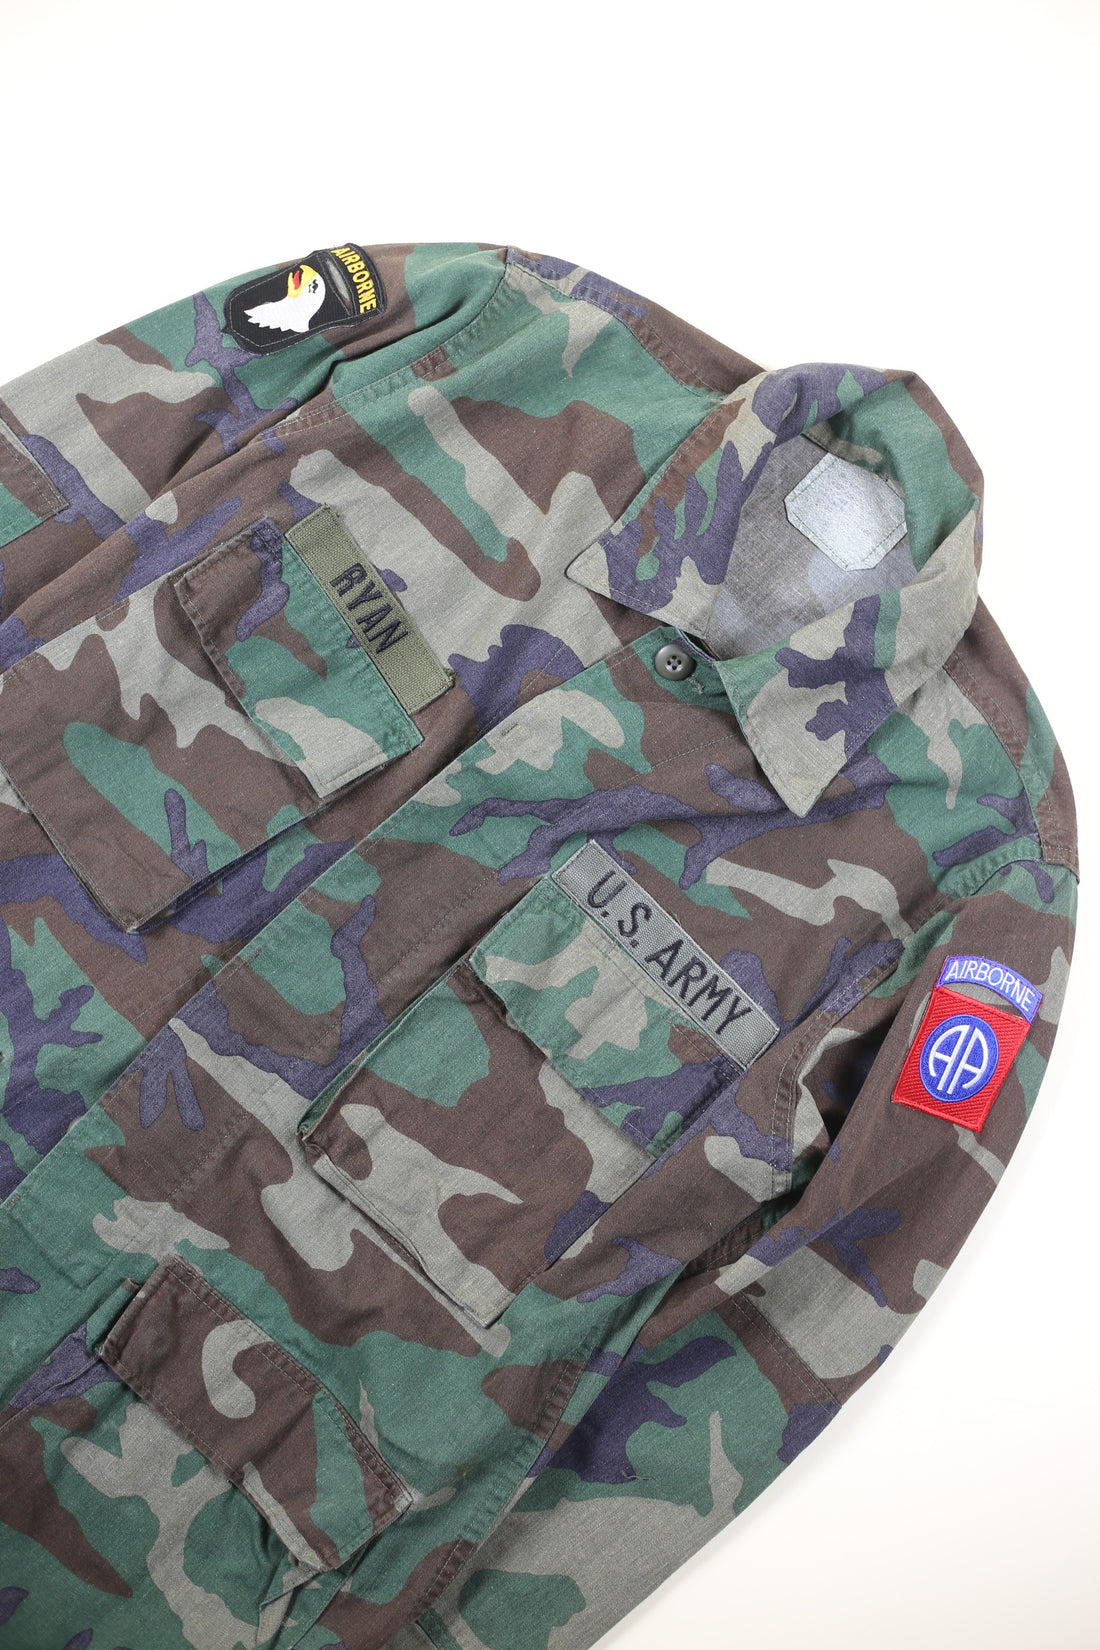 Giacca camouflage BDU WOODLAND  Us AIR FORCE - L -